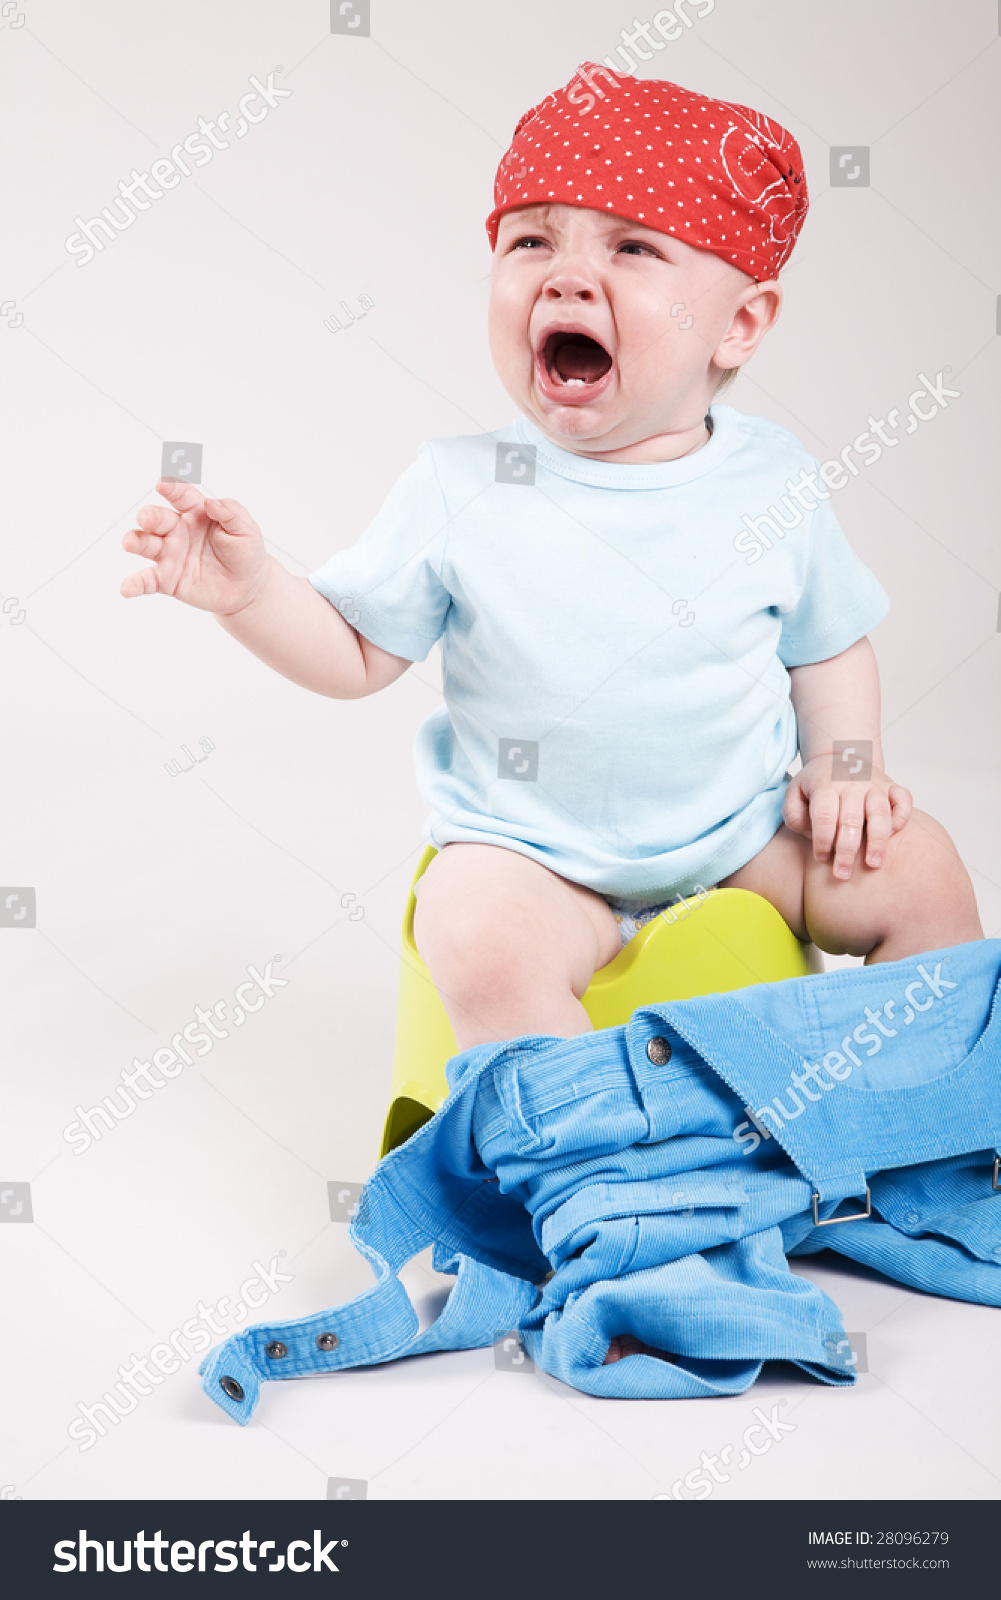 Child Crying On Potty Stock Photo 28096279 : Shutterstock